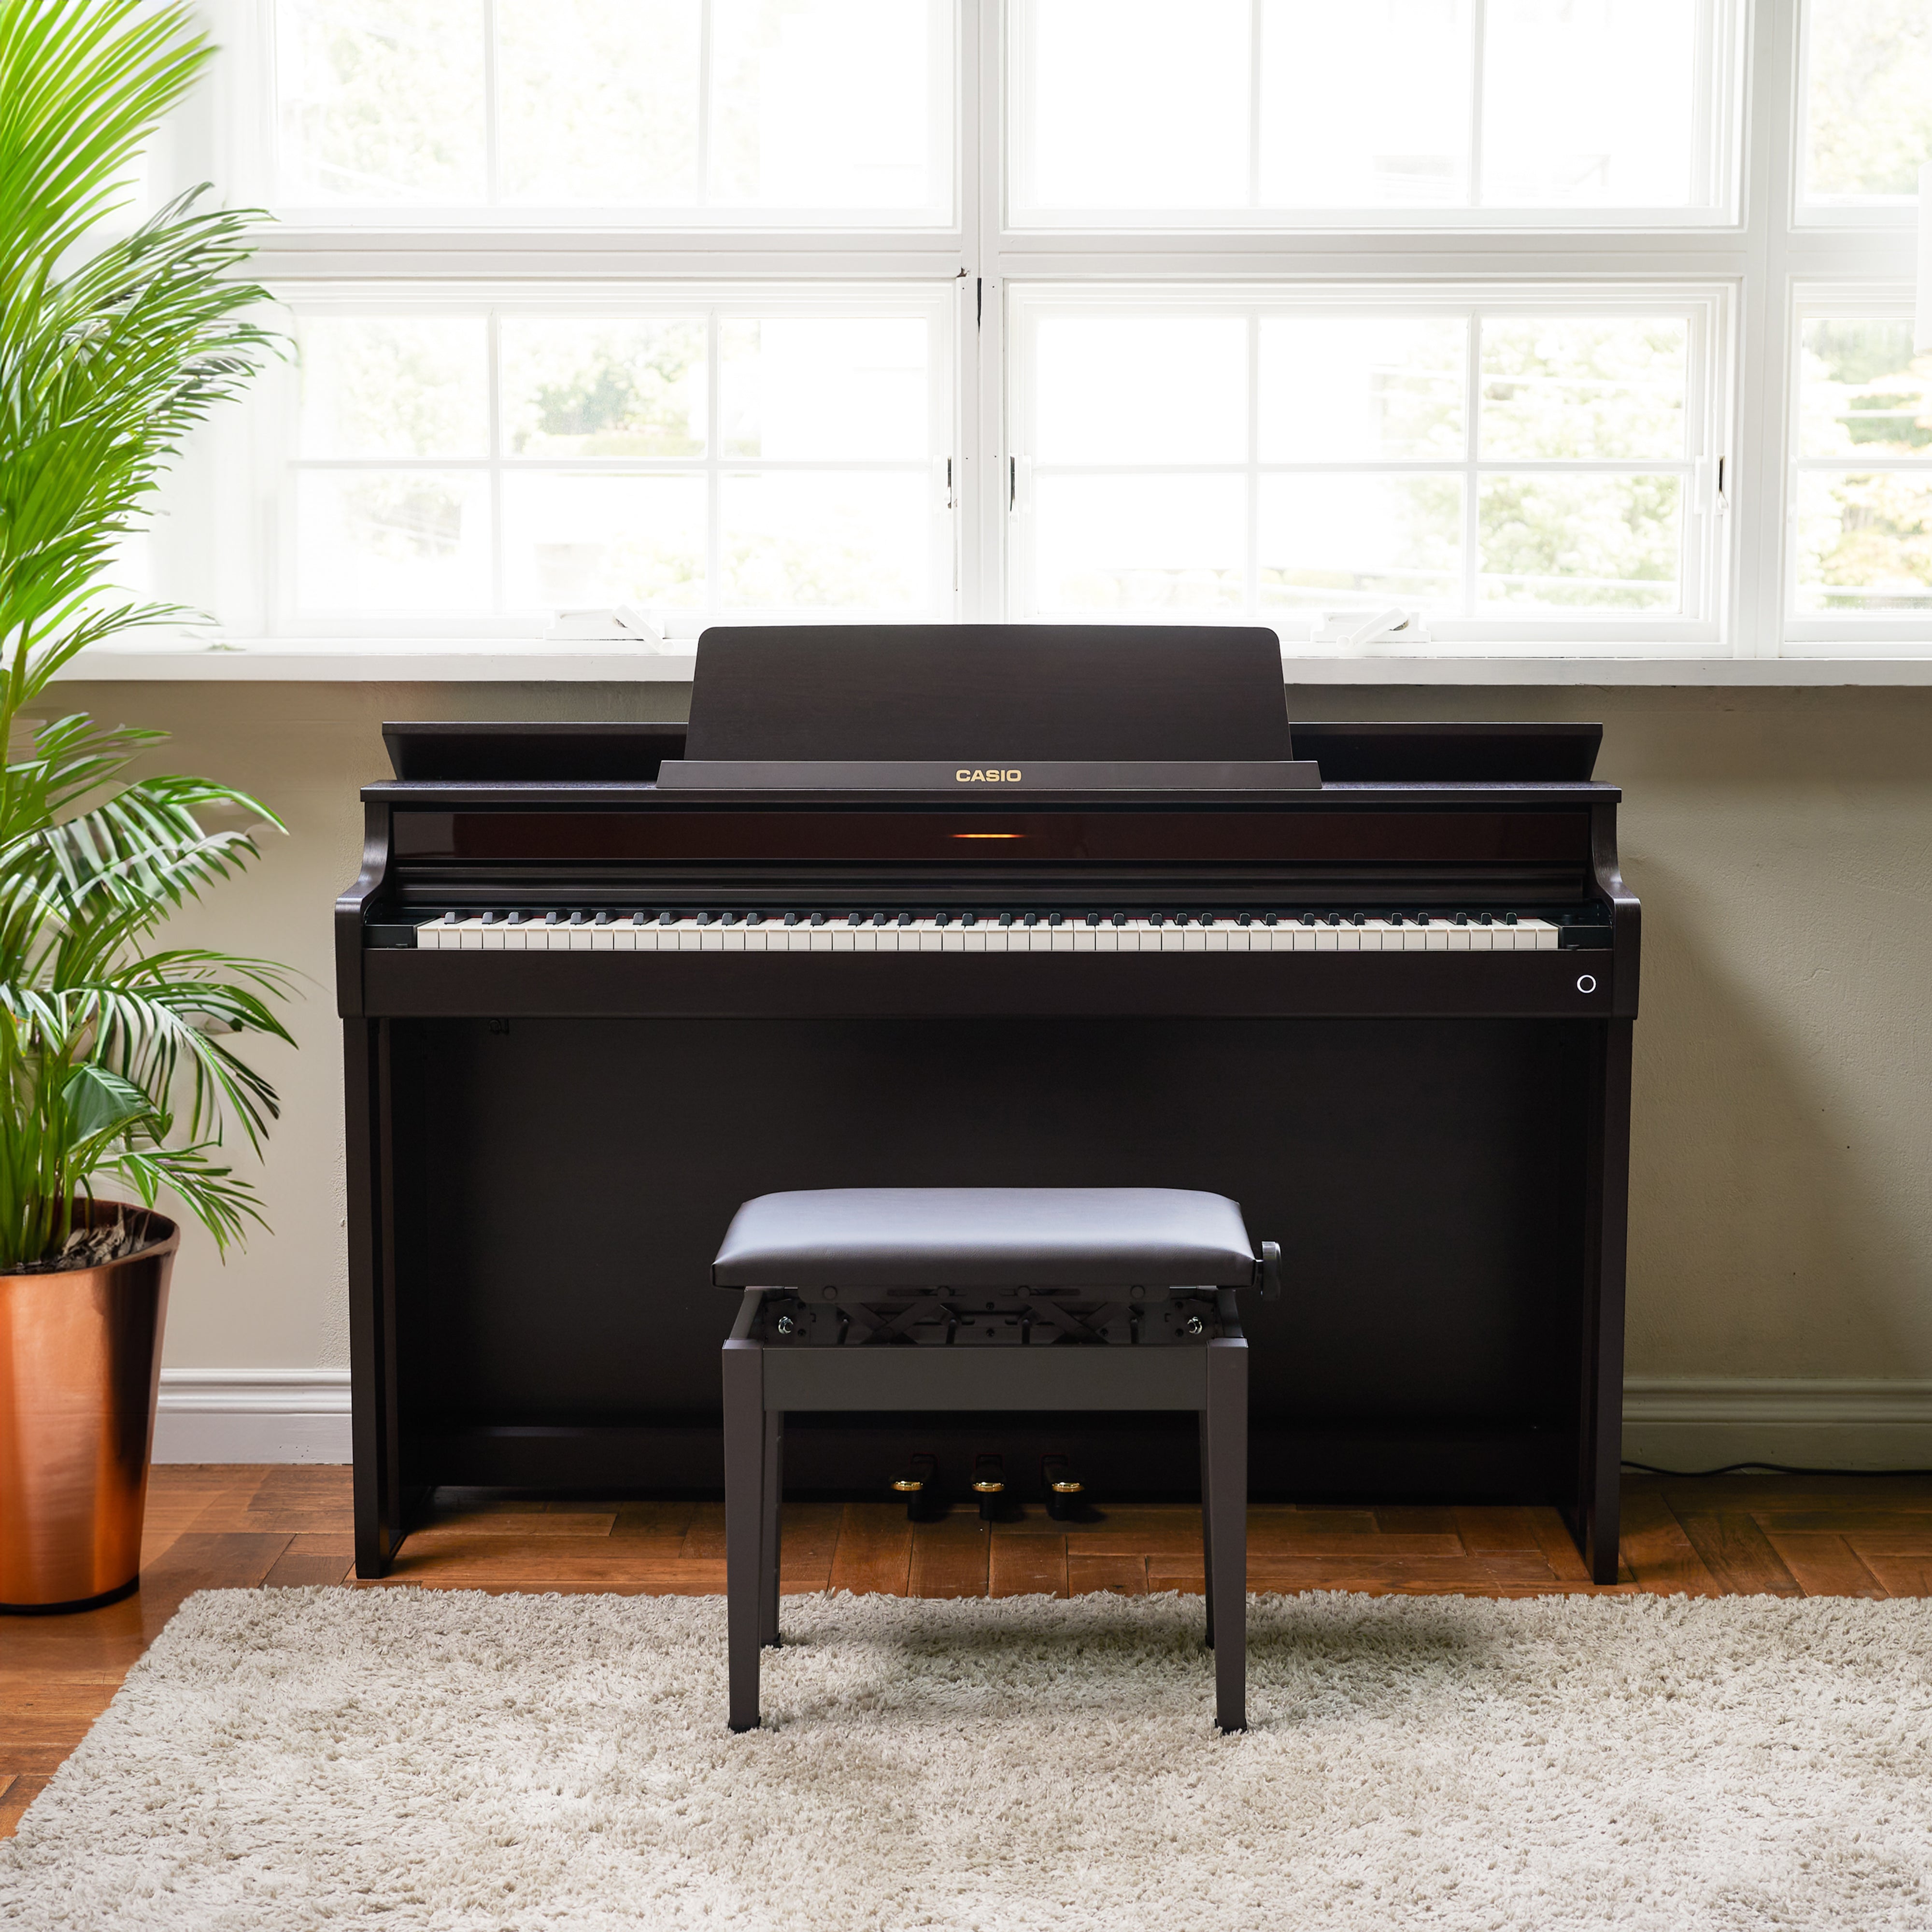 Casio Celviano AP-550 Digital Piano - Brown - front view in a stylish living room